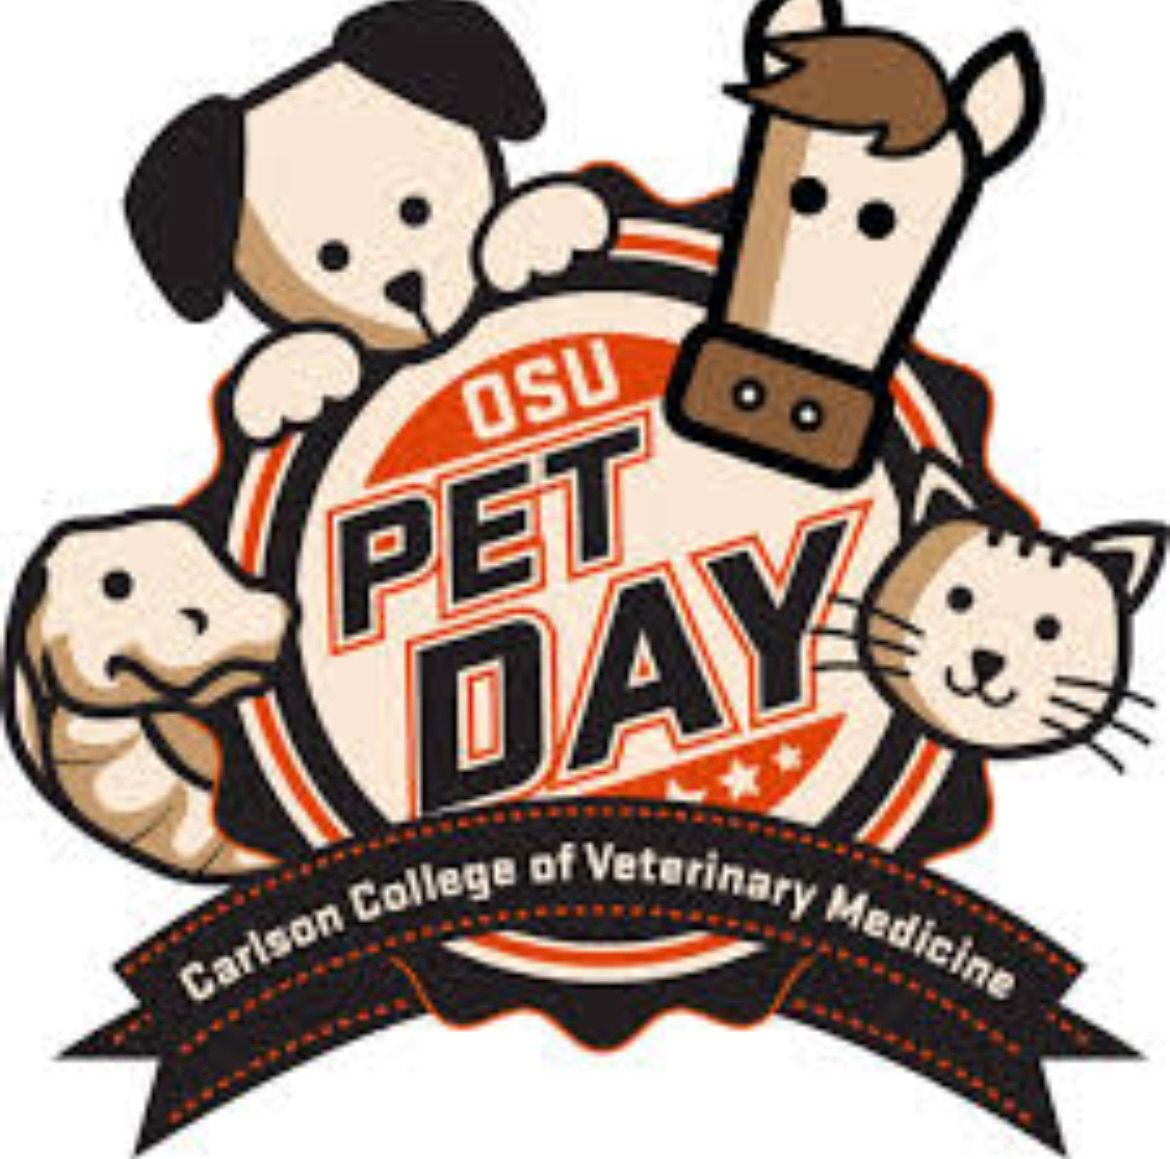 Come visit us at OSU Pet Day!